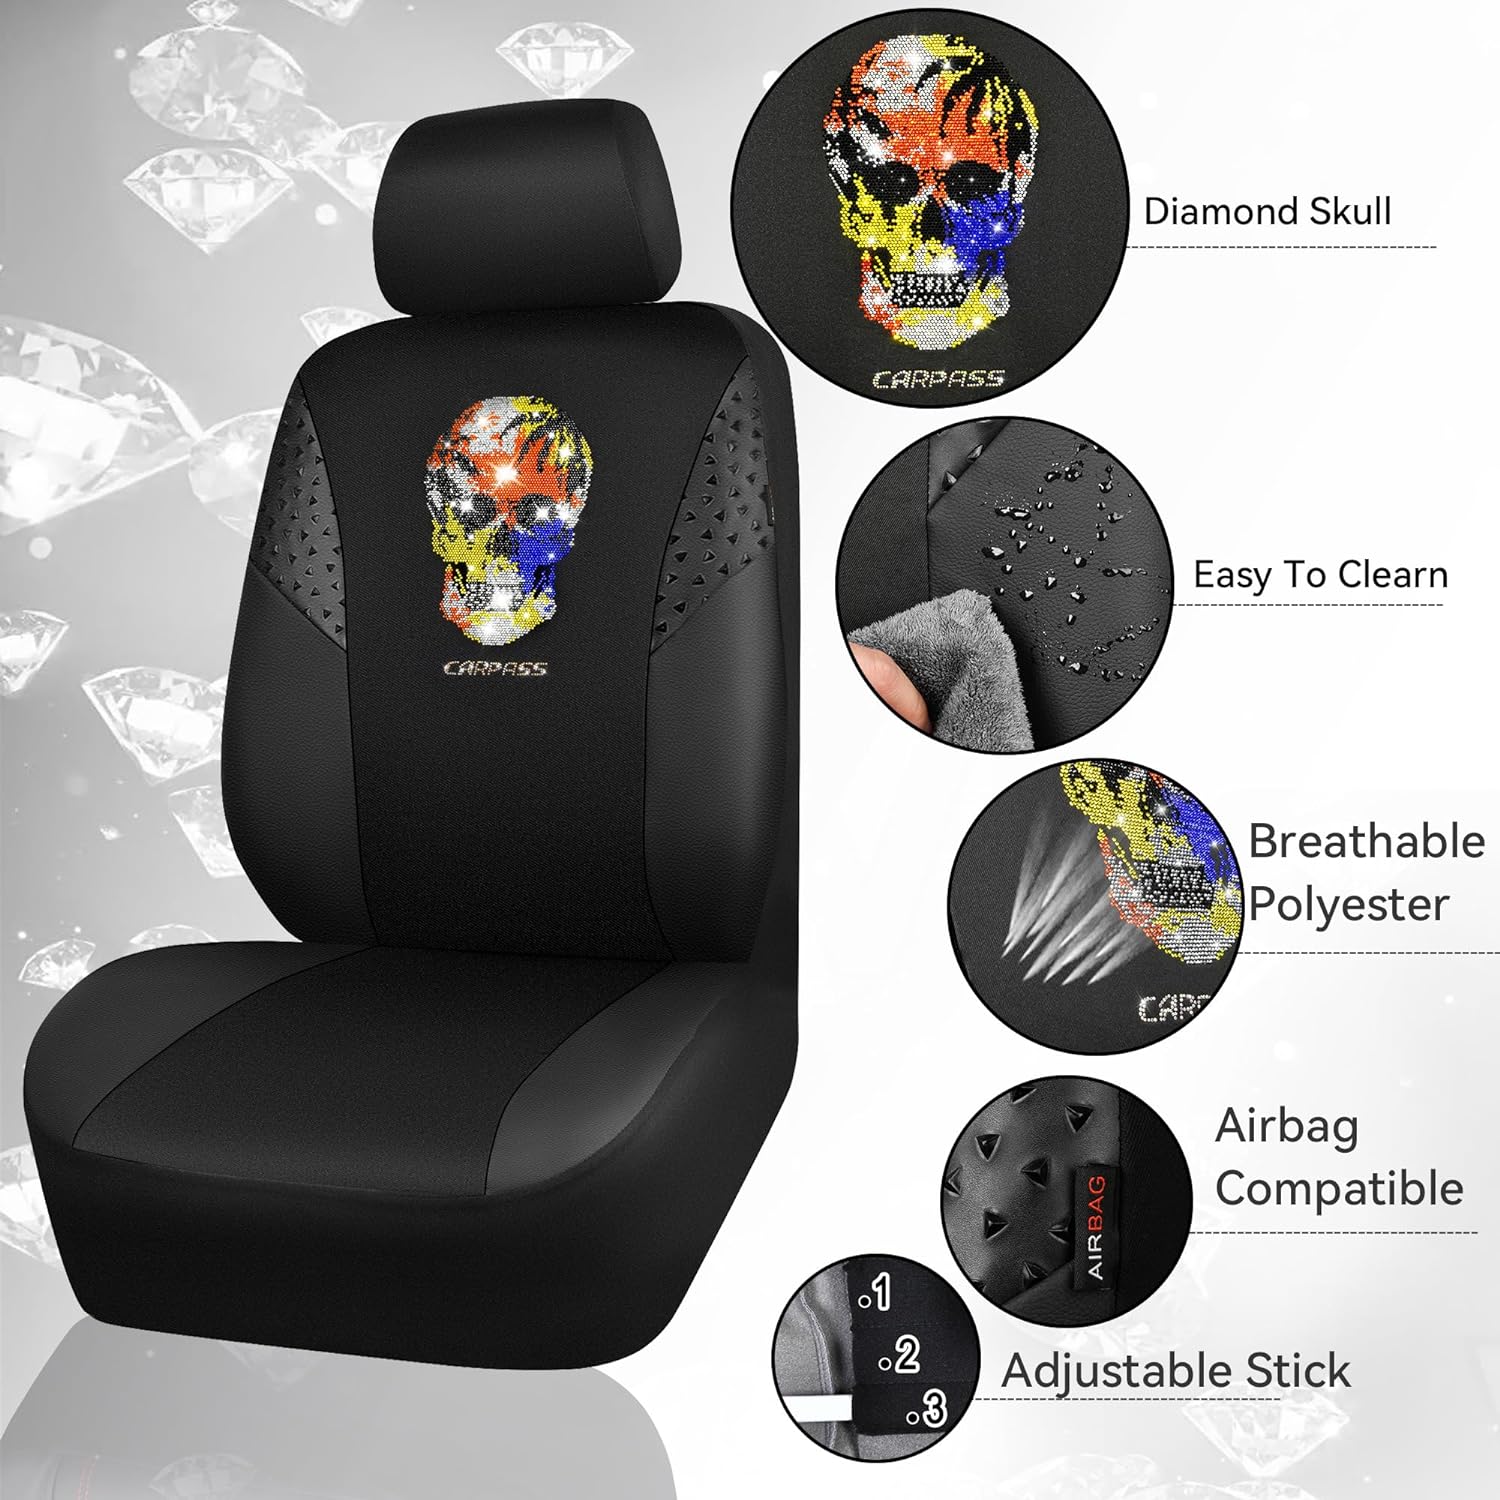 CAR PASS® Bling Rhinestone Leather & Gaberdine Fabric Car Seat Cover Front Seats Only Skull Skeleton Punk Glitter Crystal, Universal Fit for SUVs,Vans,Coupe,Trucks(2 Piece Black Multicolor Diamond)